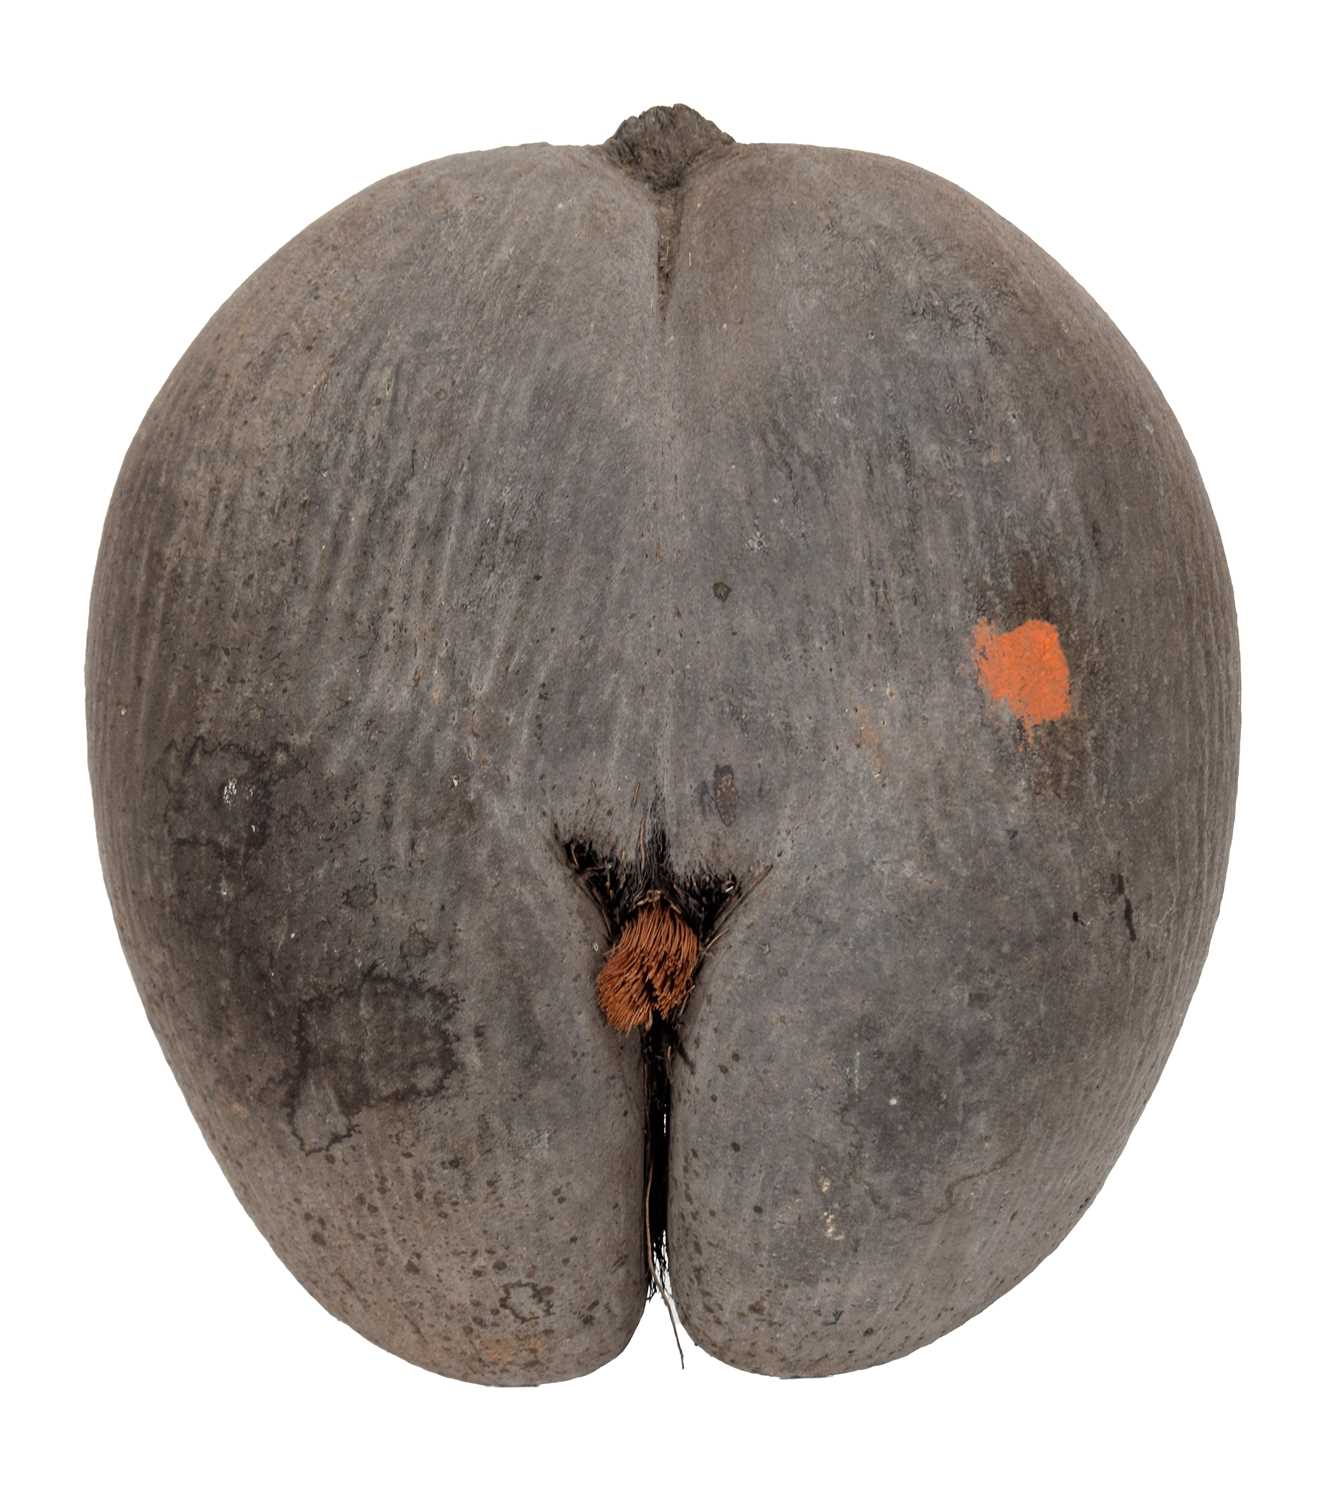 Lot 219 - Natural History: A Large Coco de Mer Nut